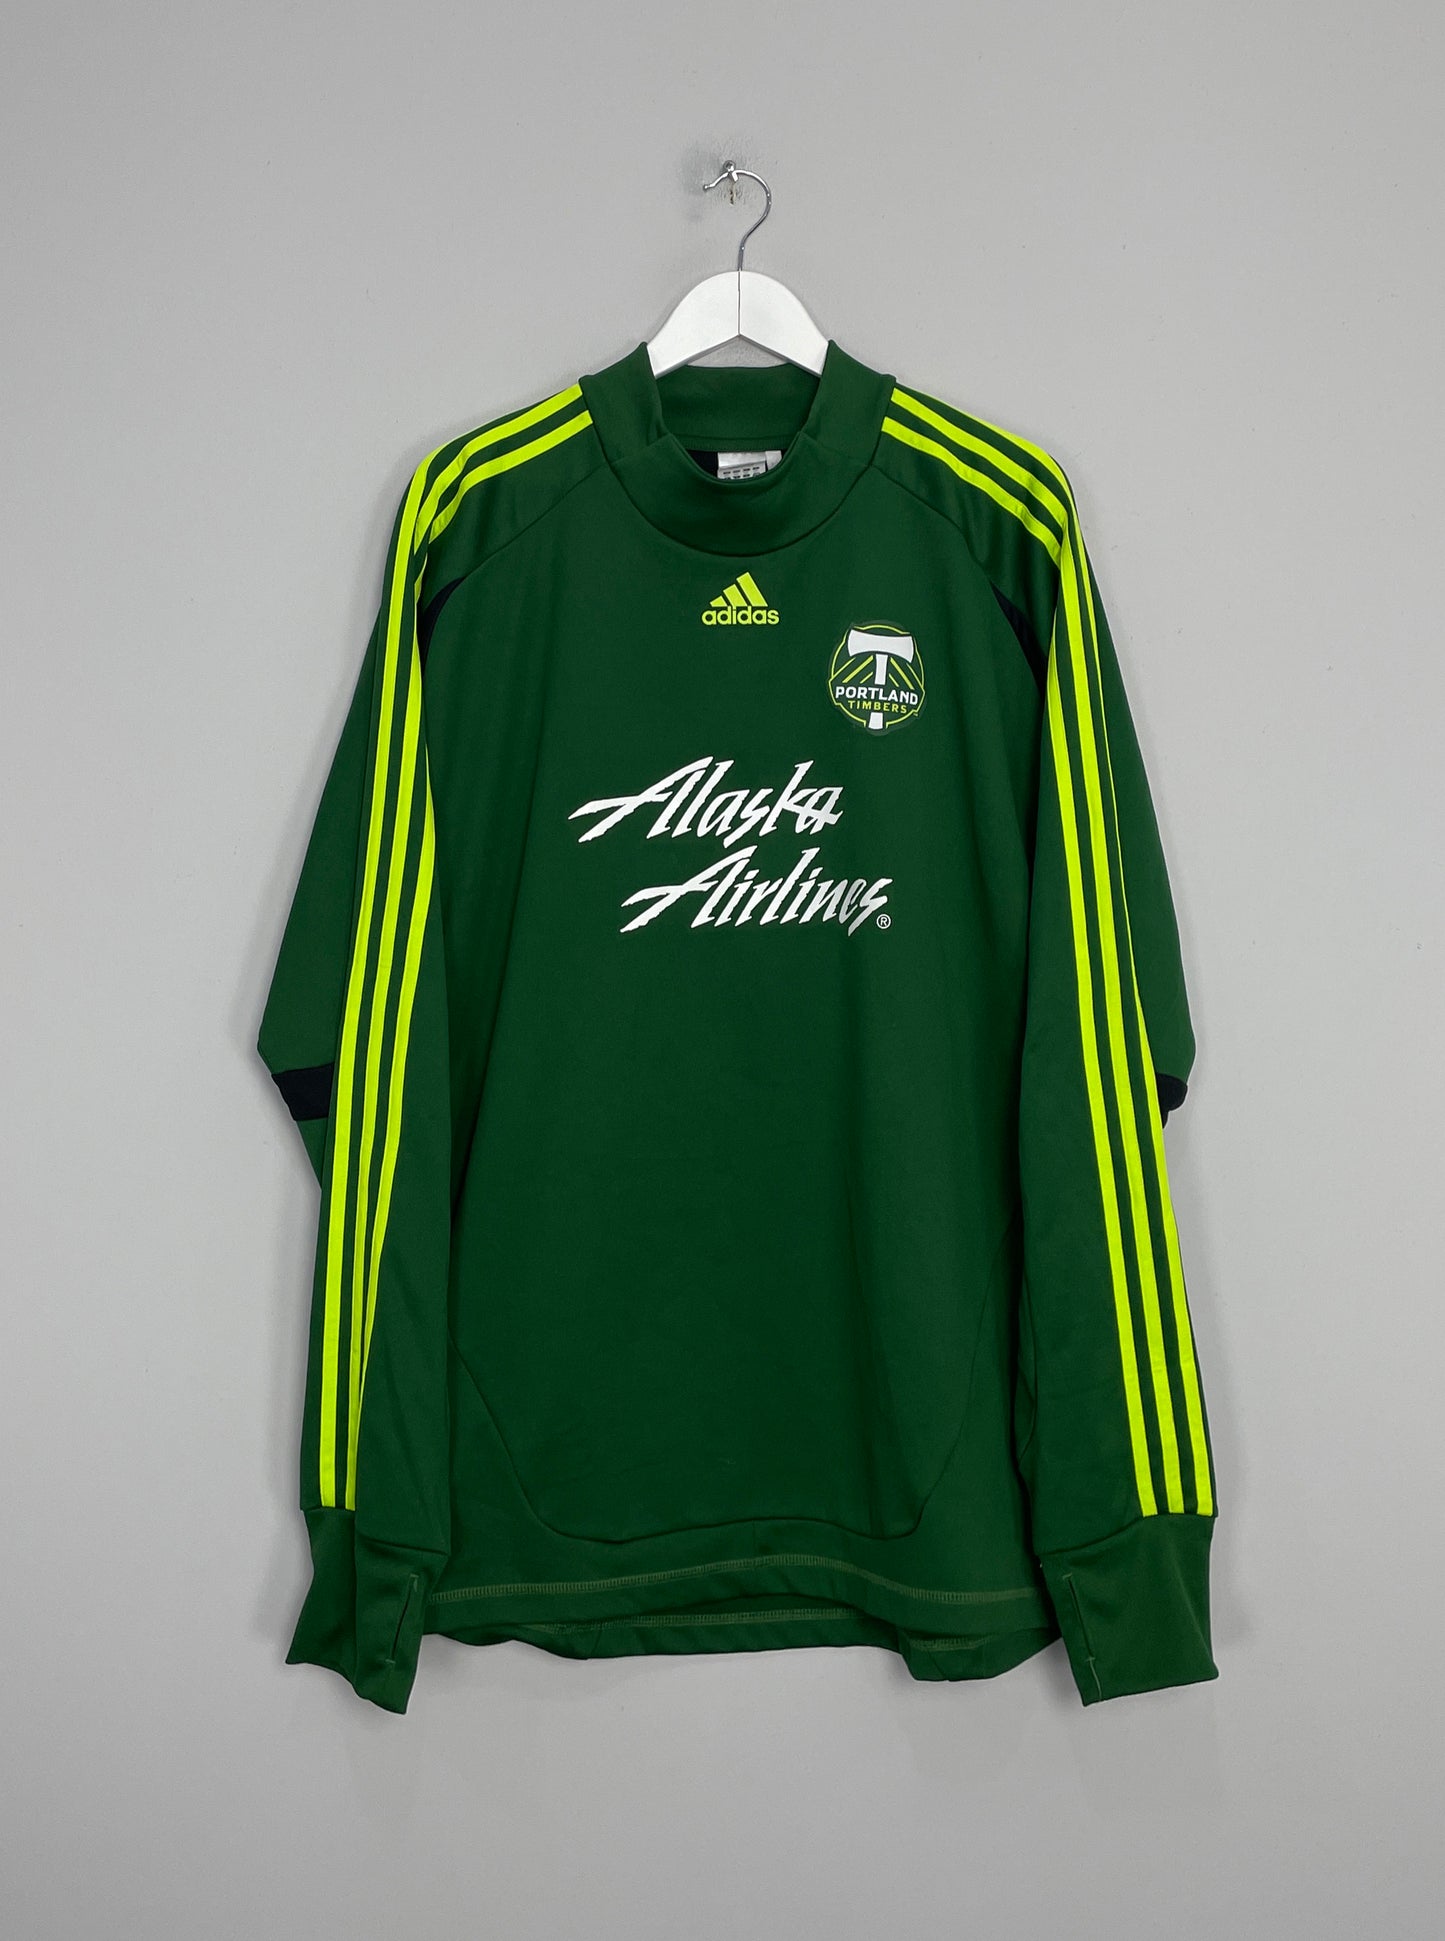 Image of the Portland Timbers shirt from the 2011/13 season